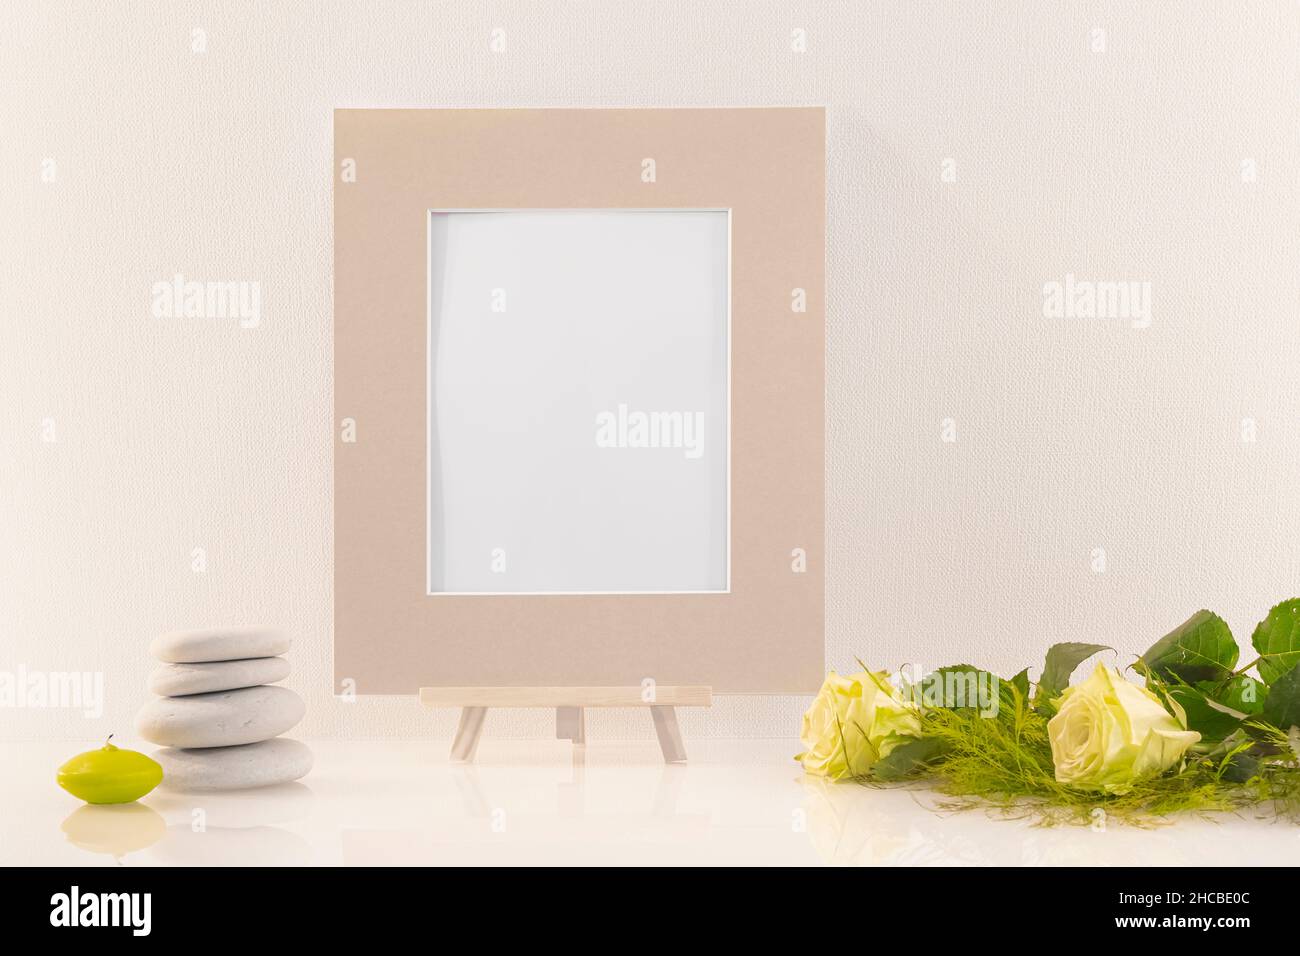 Empty photo frame to write a message, invitation, wishes, photography. Stock Photo